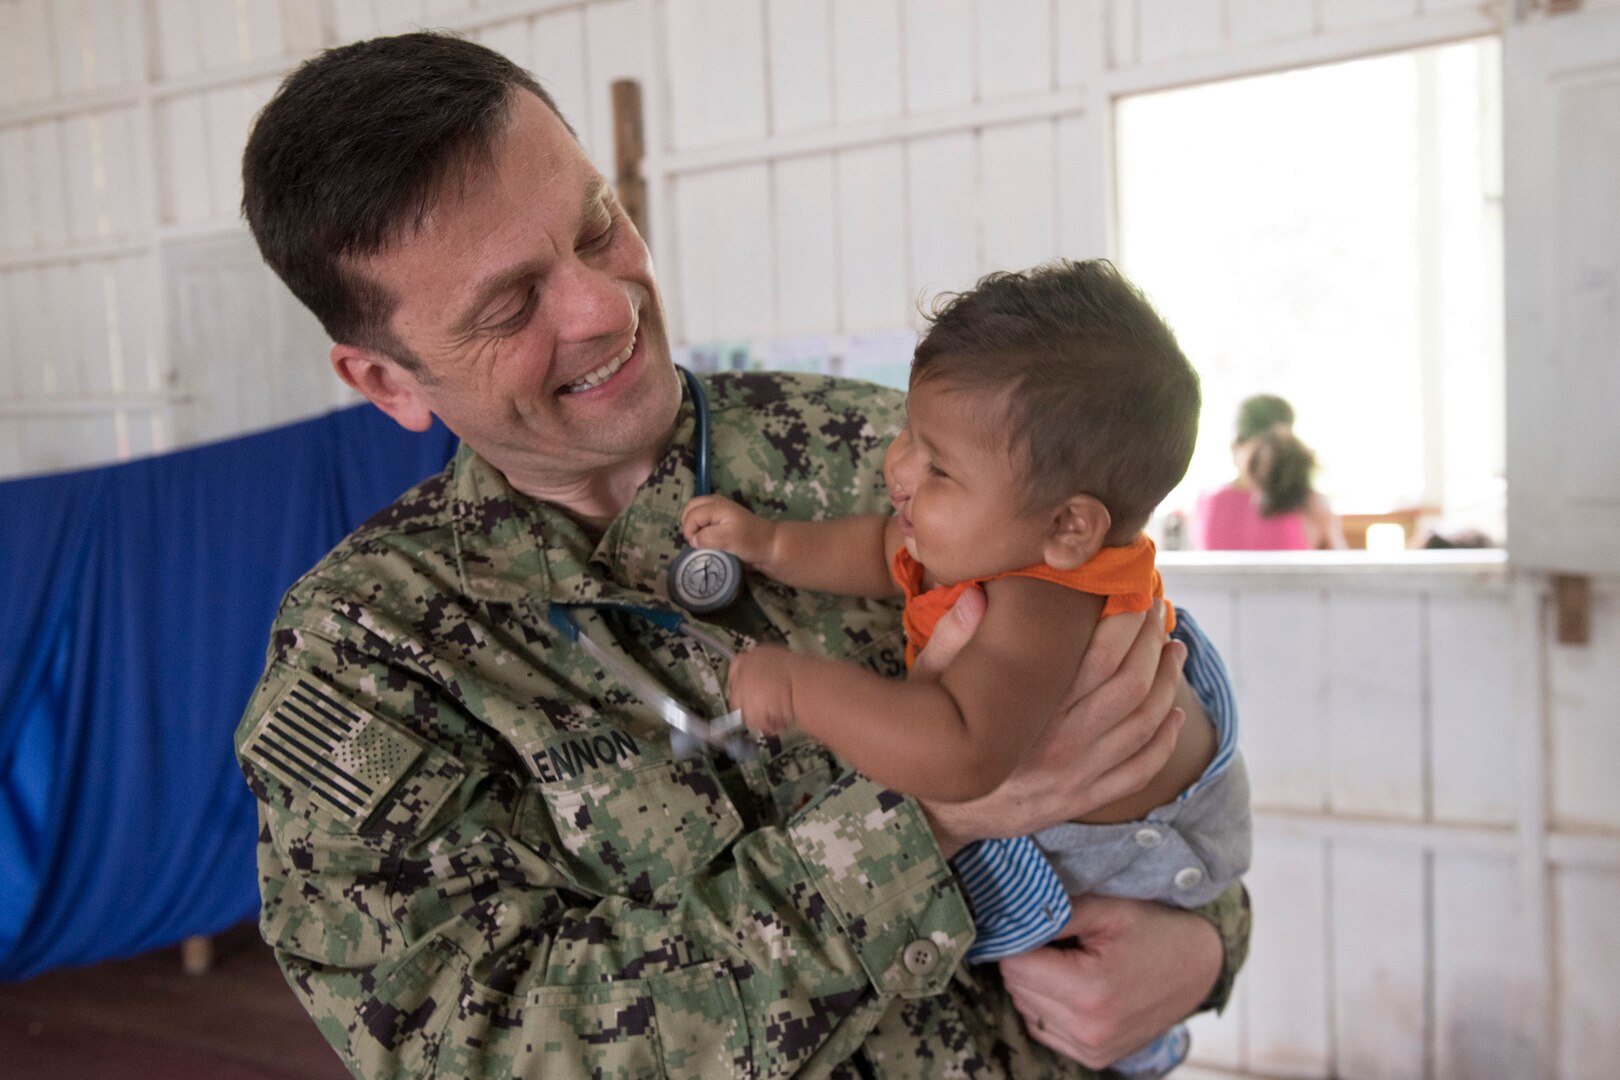 Lt. Cmdr. Robert Lennon meets with a young patient during a medical clinic in Vencedor, Brazil, Feb. 27.